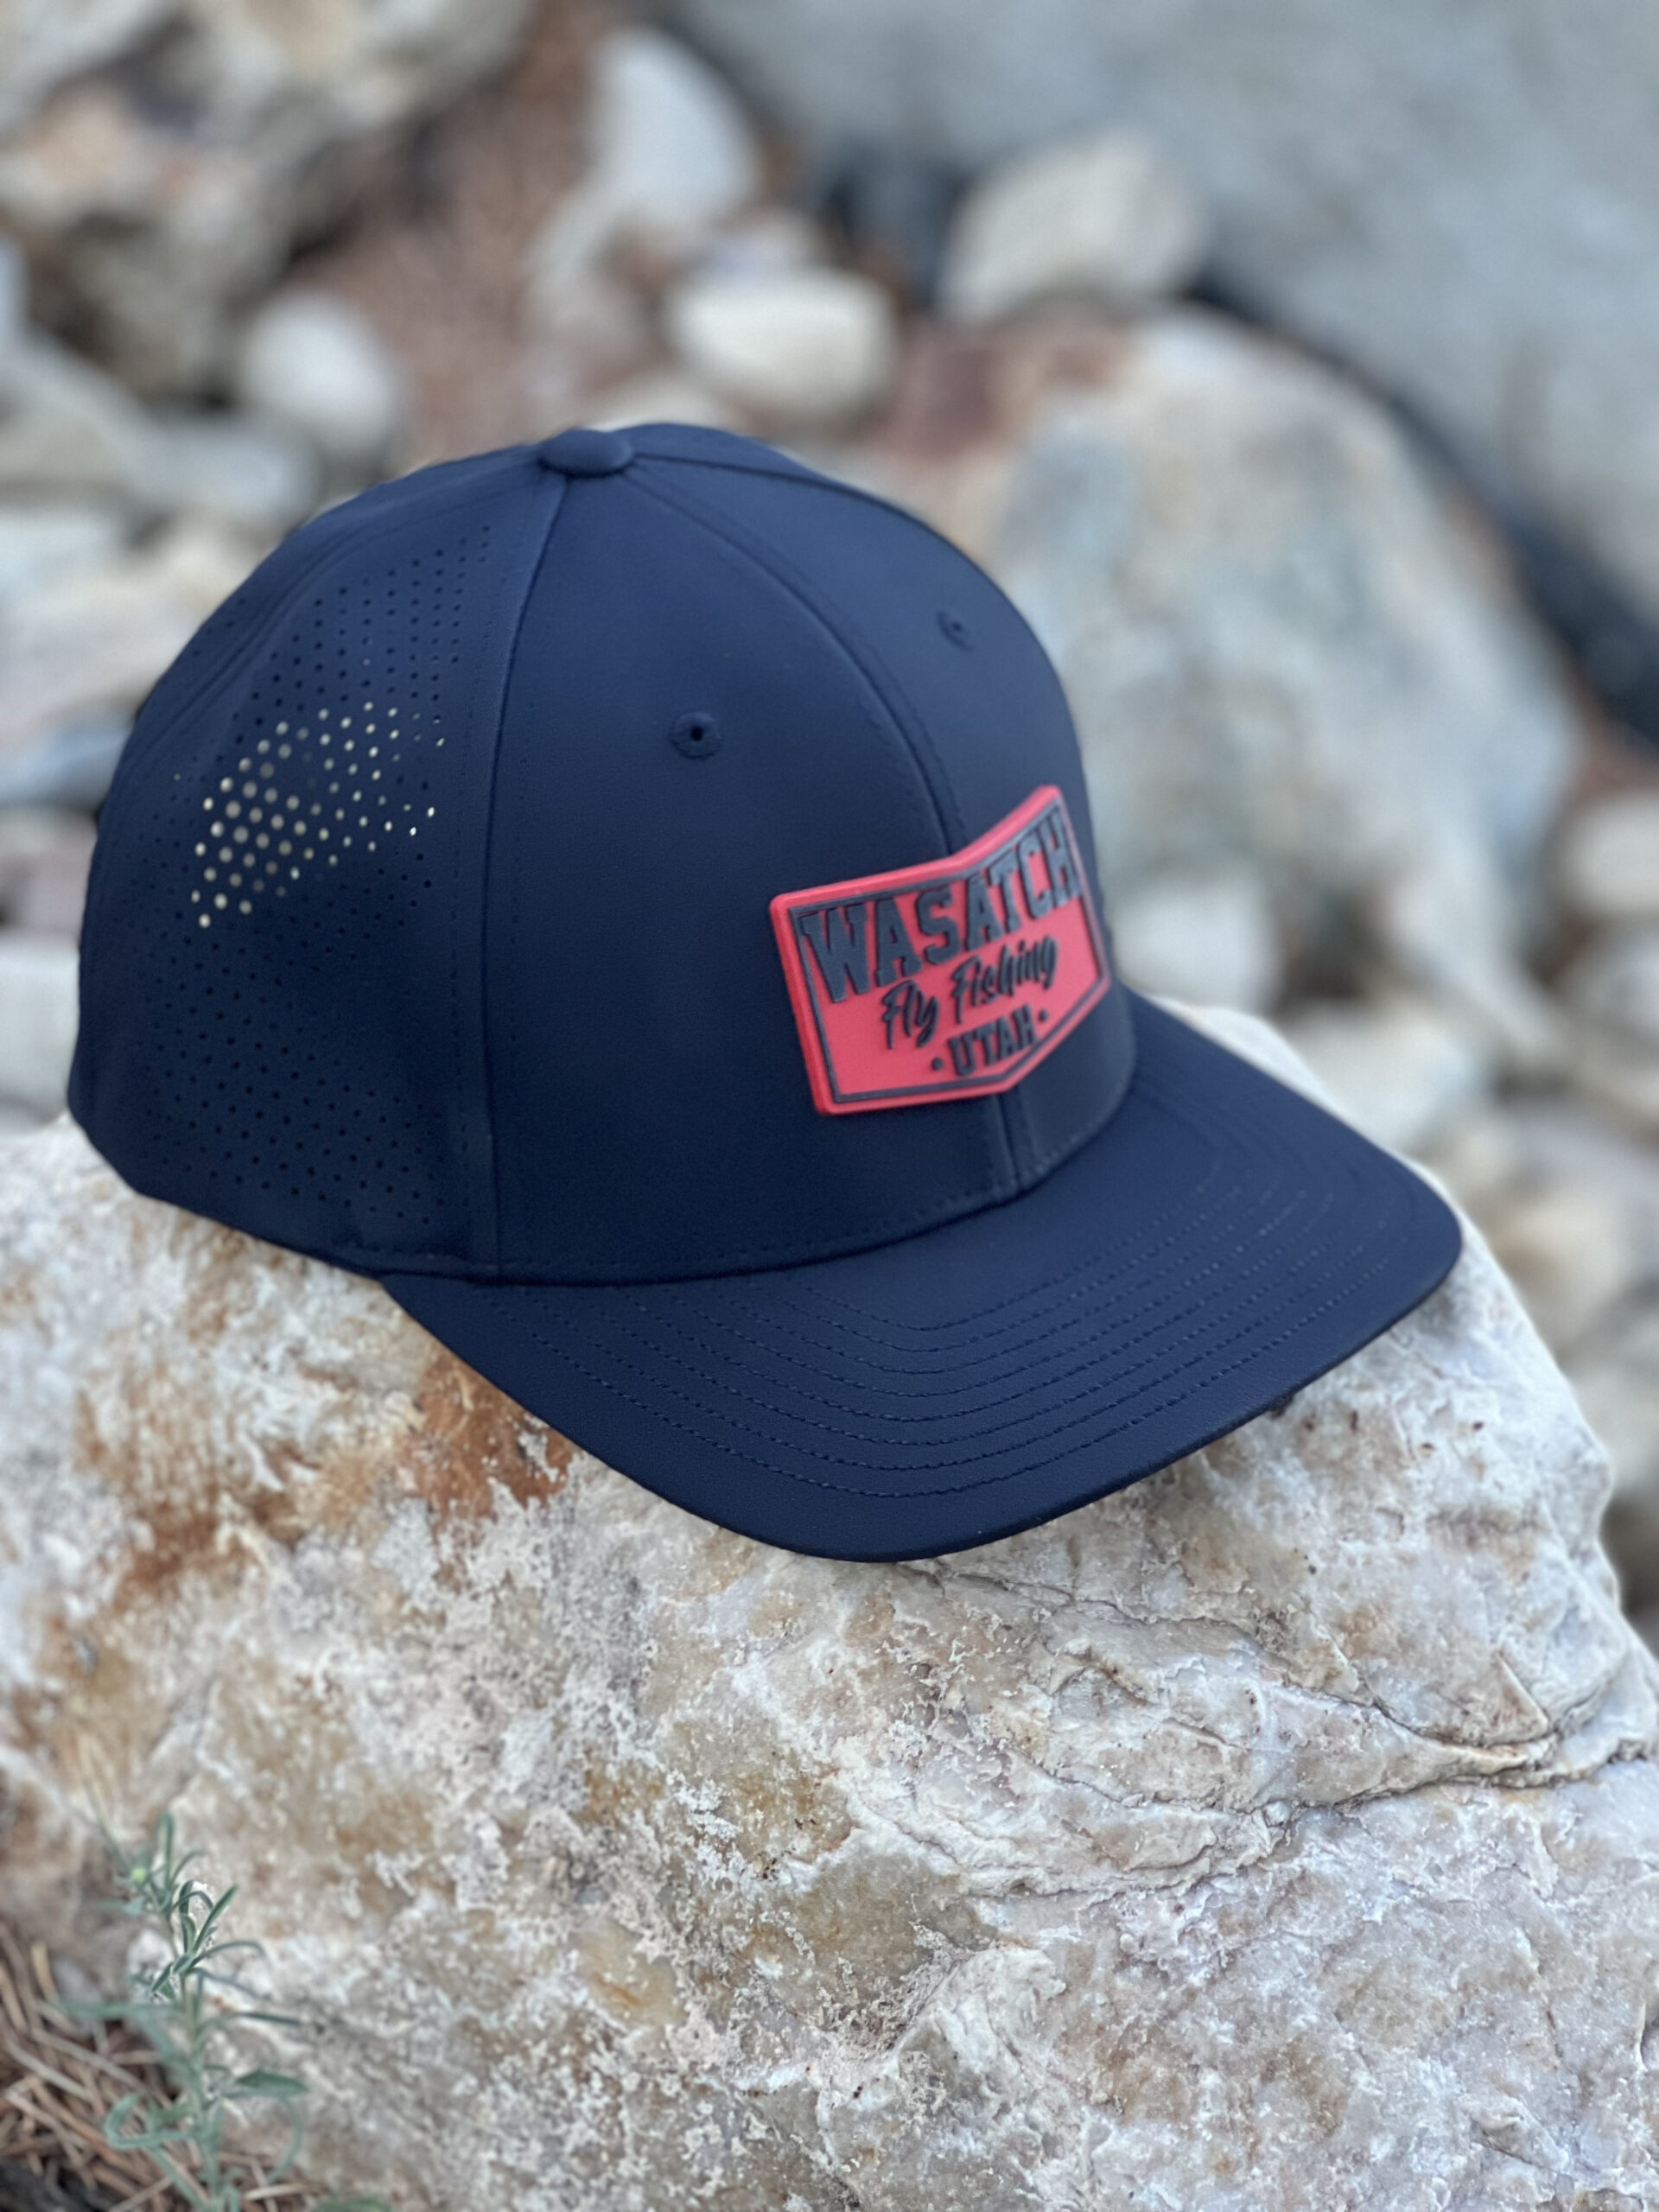 Wasatch Flyfishing Hats (Elite) - Wasatch Fly Fishing